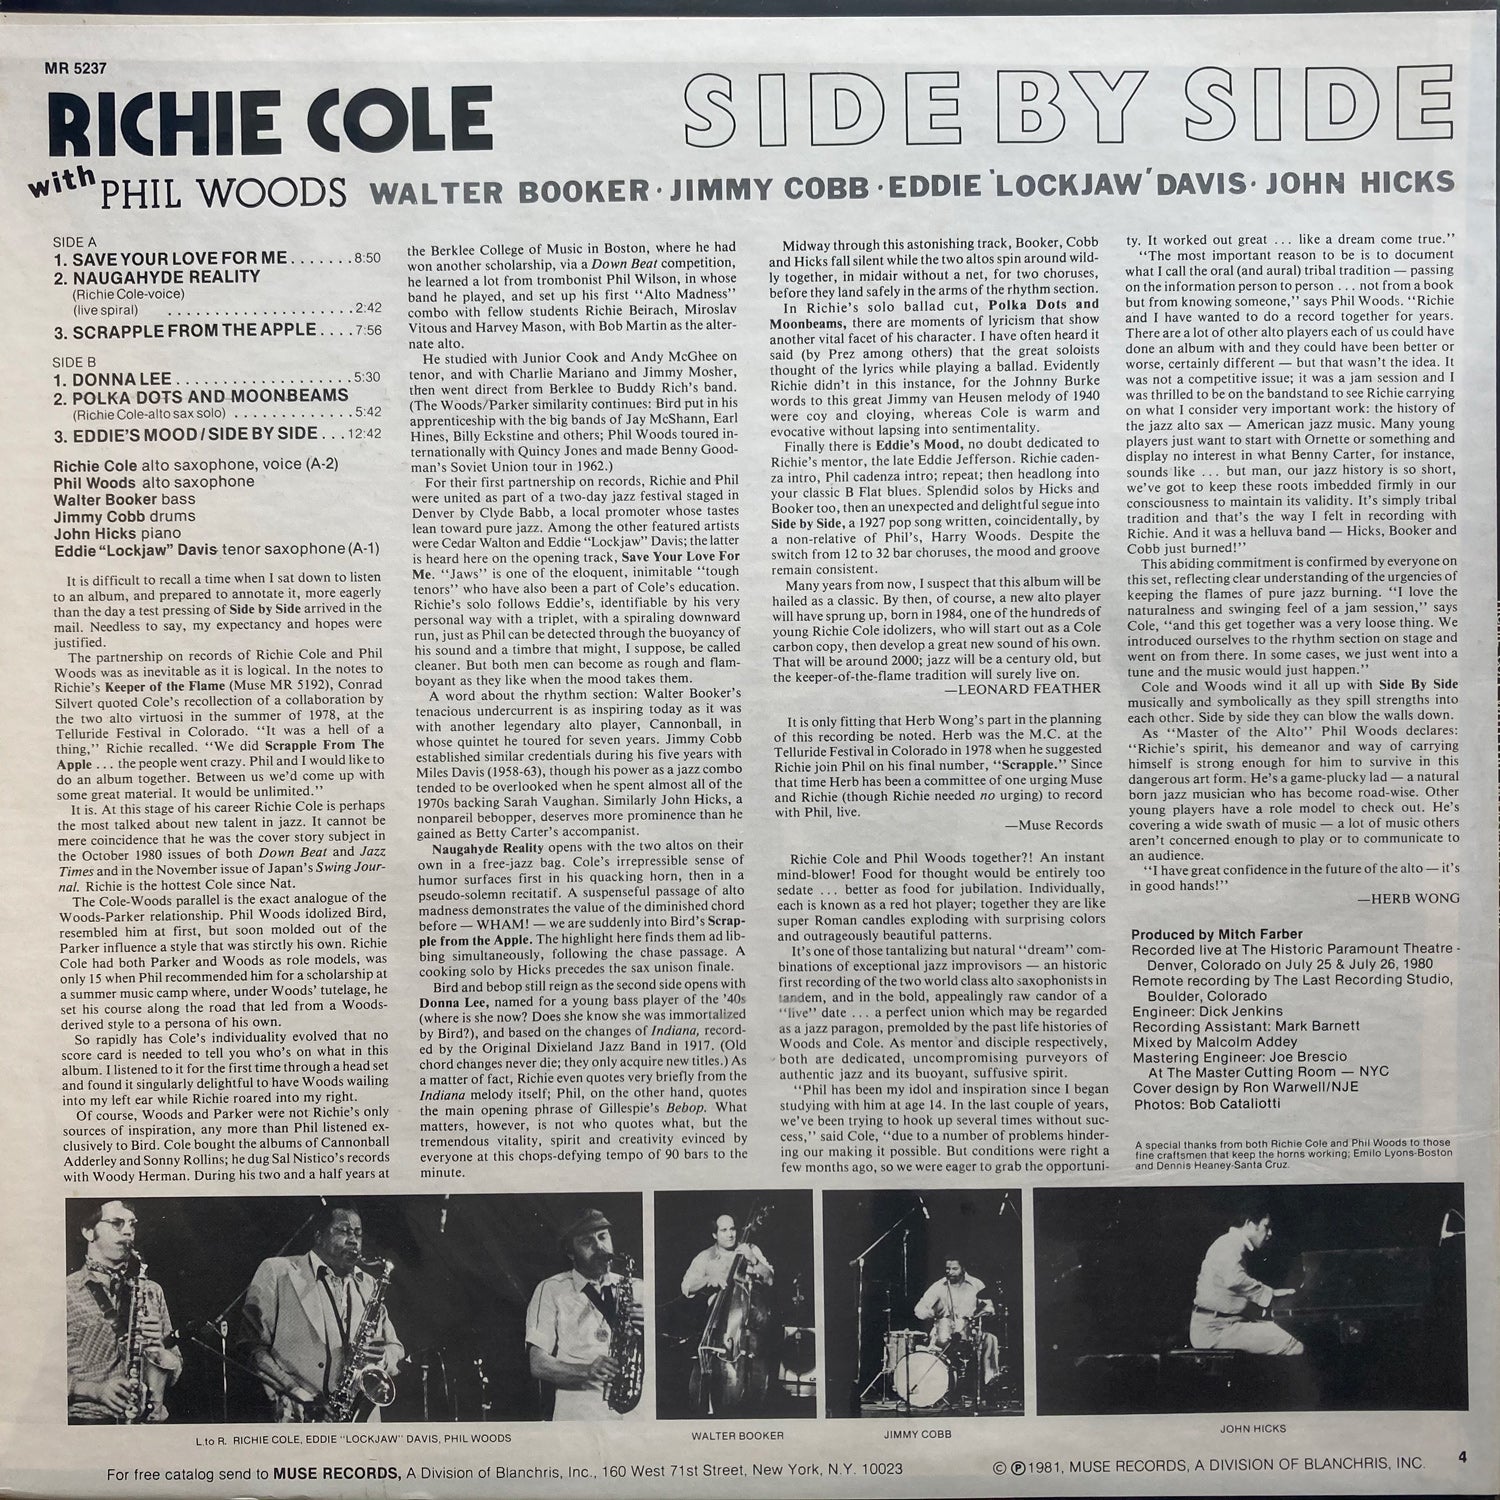 Richie Cole with Phil Woods - Side By Side